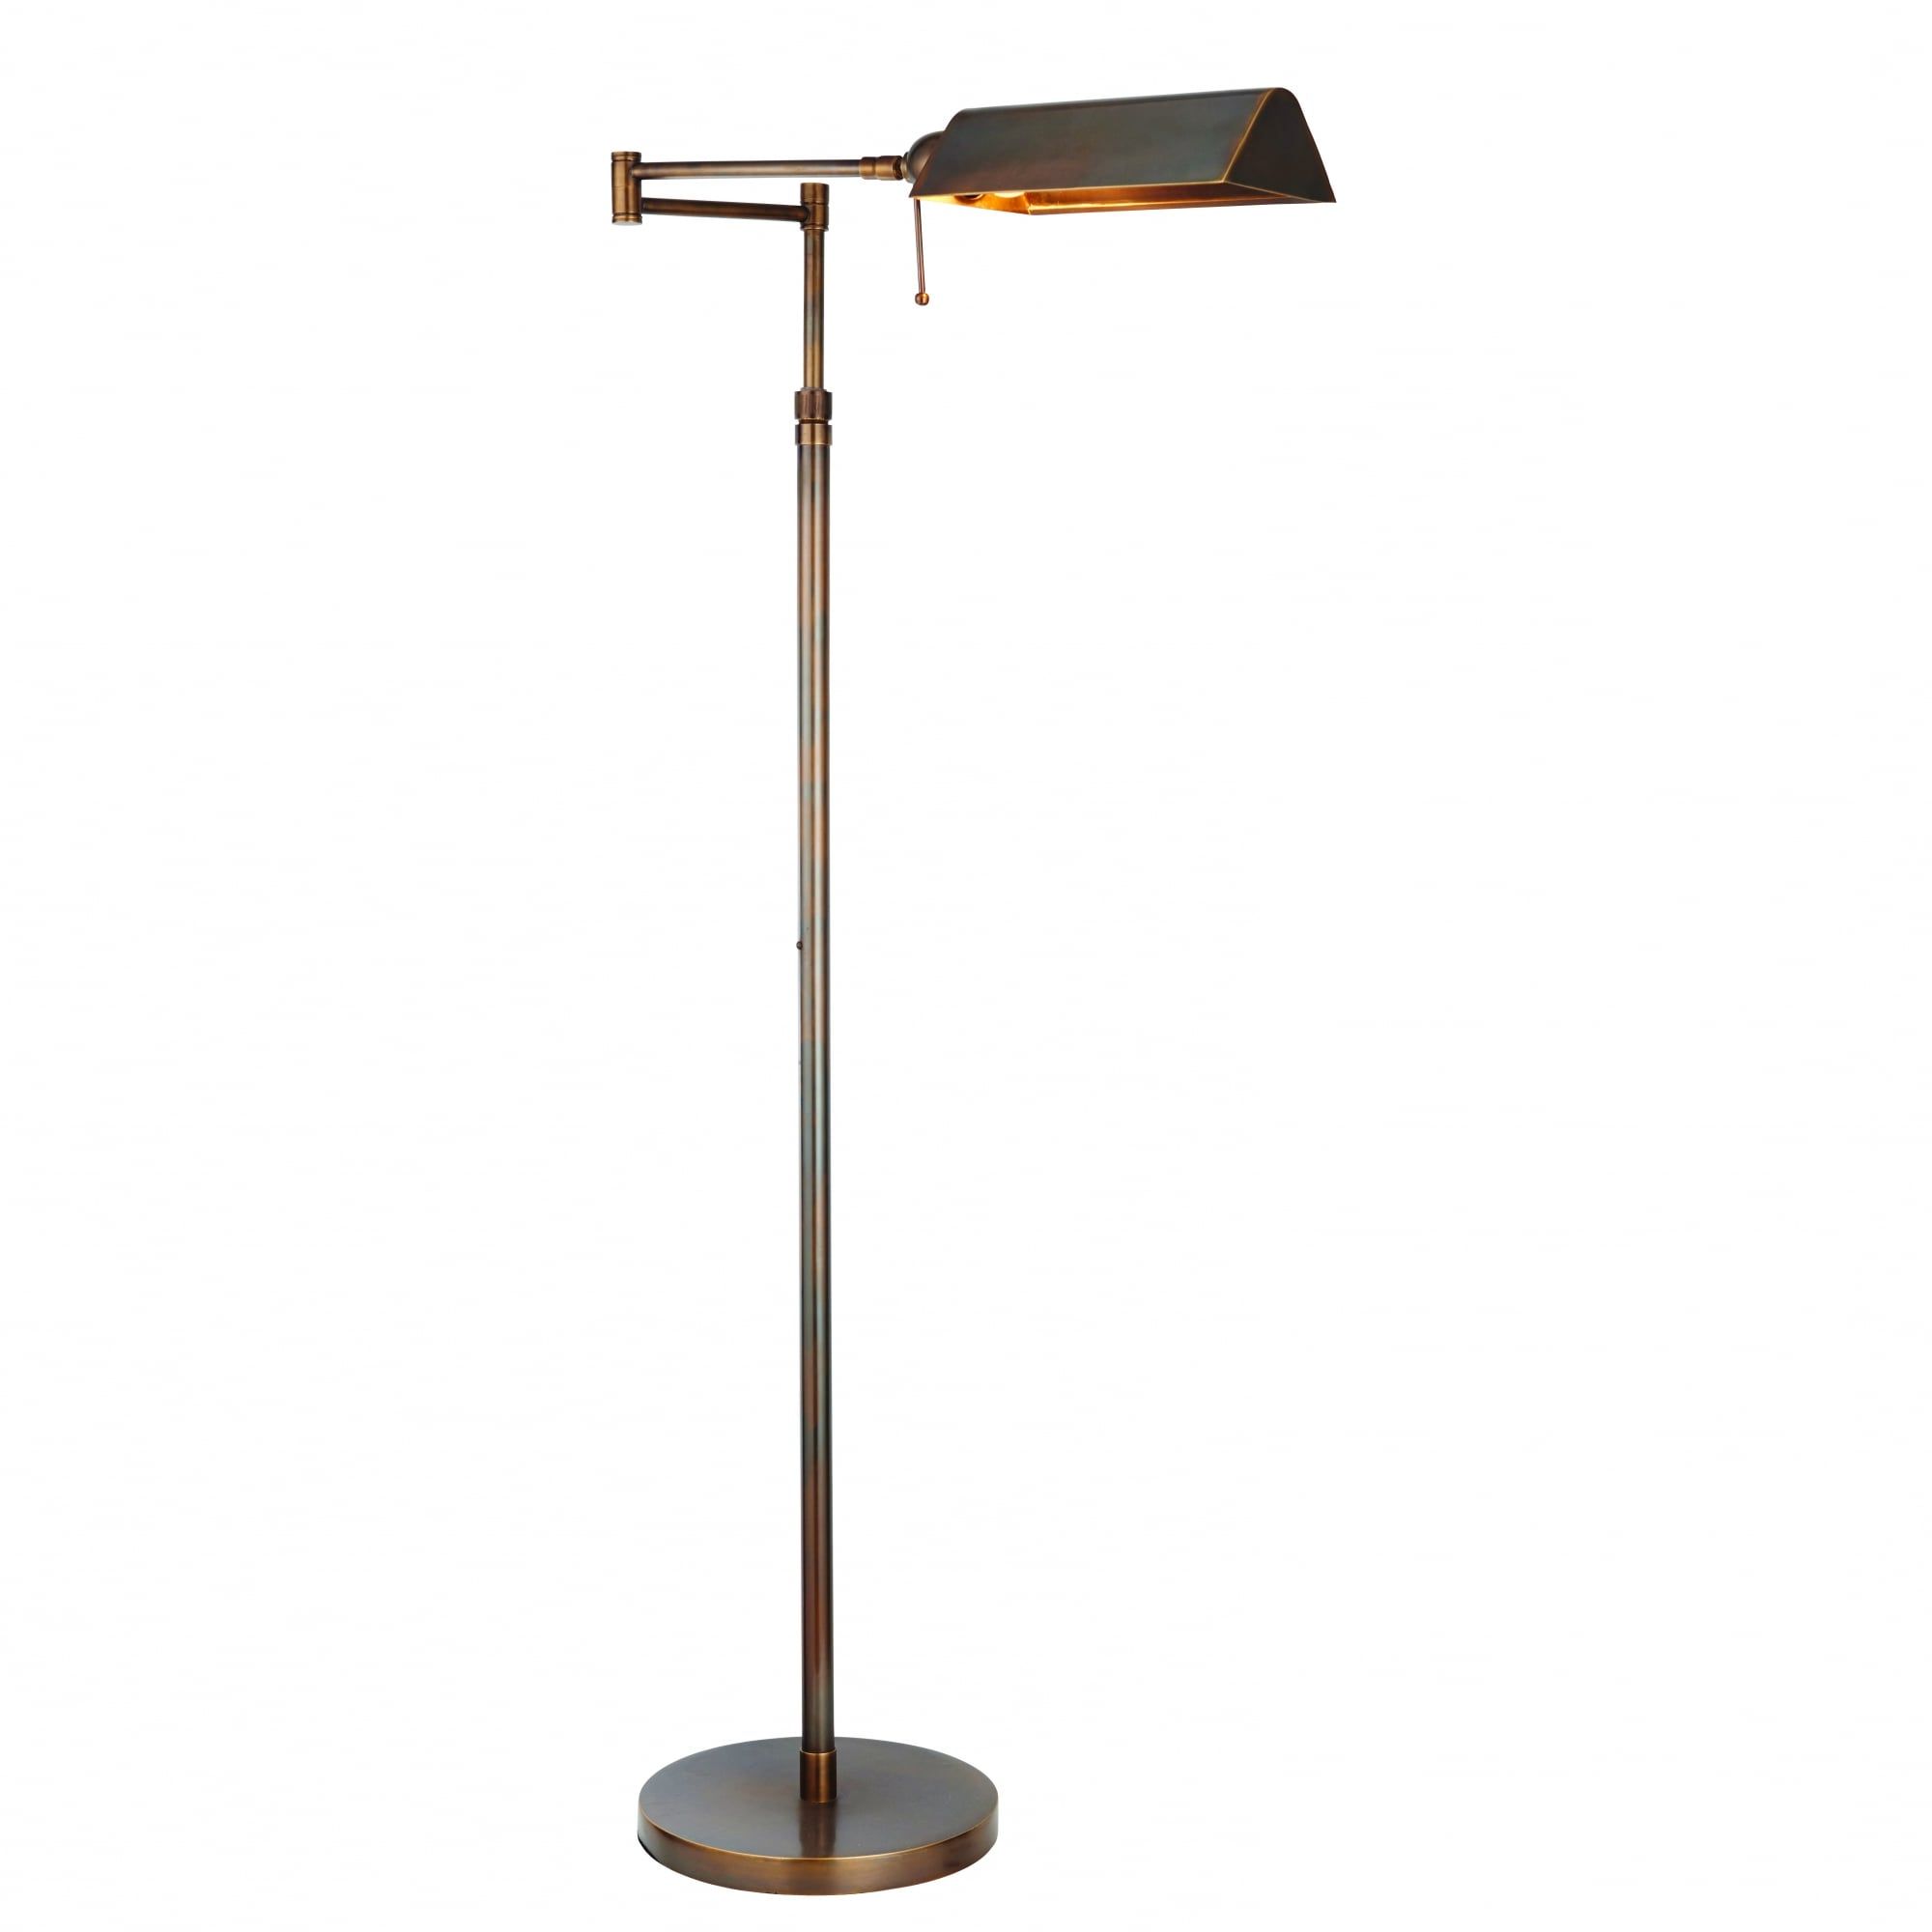 Adjustble Arm Standing Lamps Inside Widely Used Dark Antique Swing Arm Standard Lamp In Traditional Period Styling (View 13 of 15)